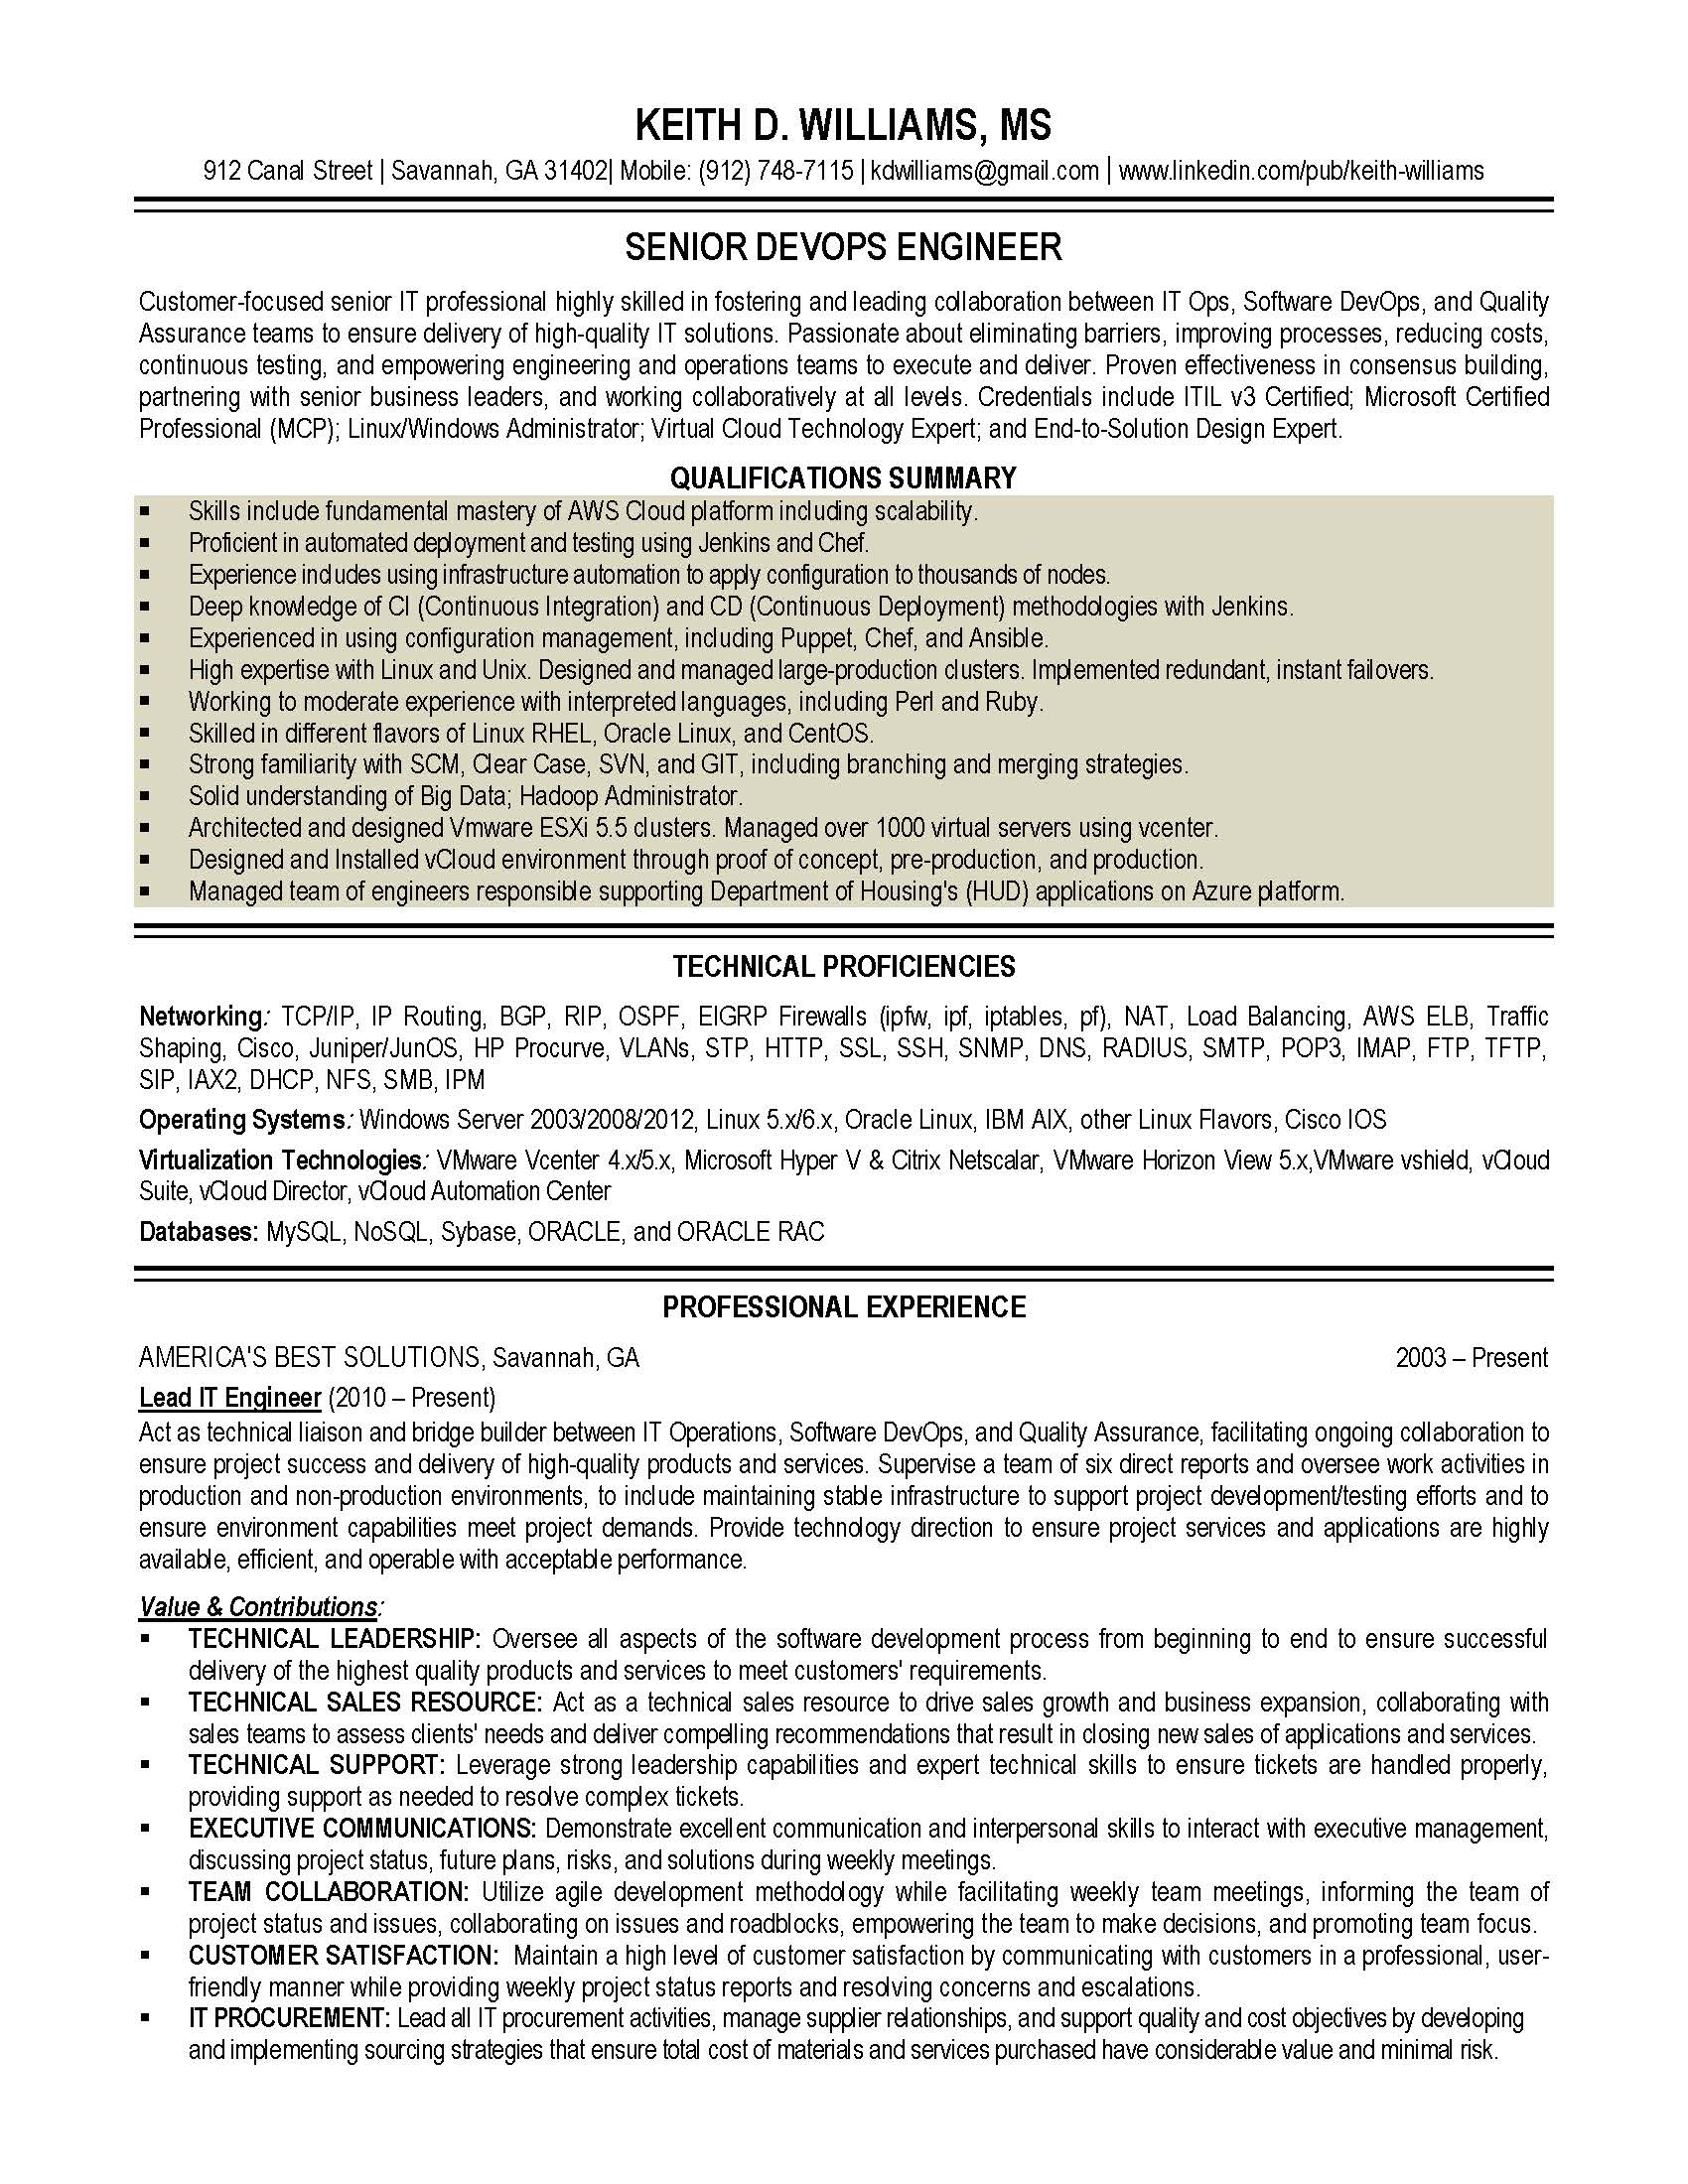 IT resume sample 2, provided by Elite Resume Writing Services